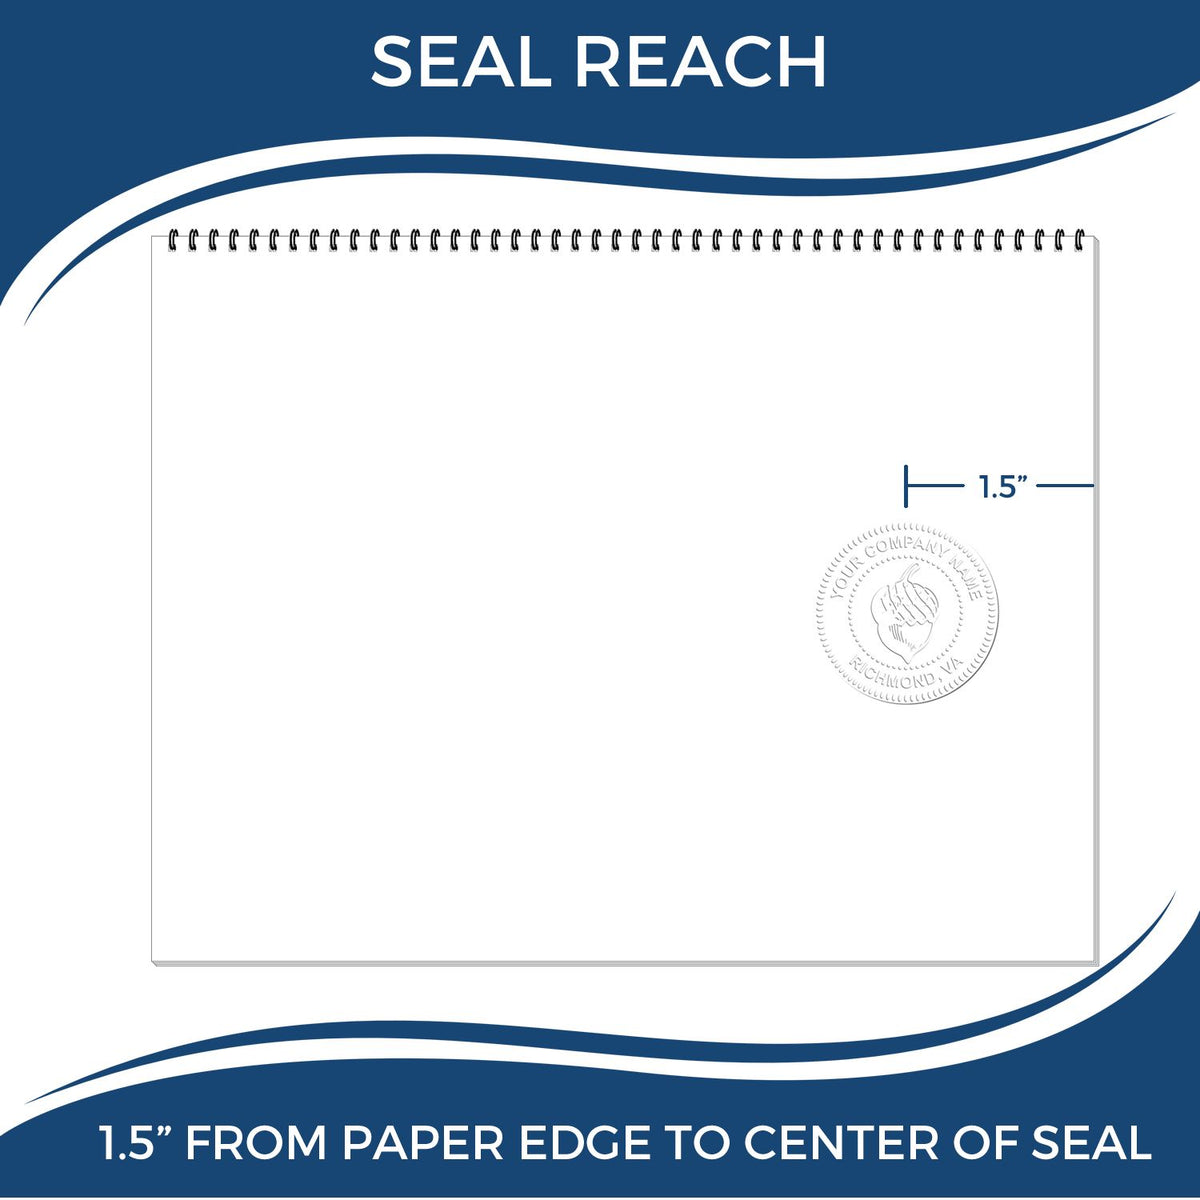 An infographic showing the seal reach which is represented by a ruler and a miniature seal image of the Hybrid South Dakota Geologist Seal